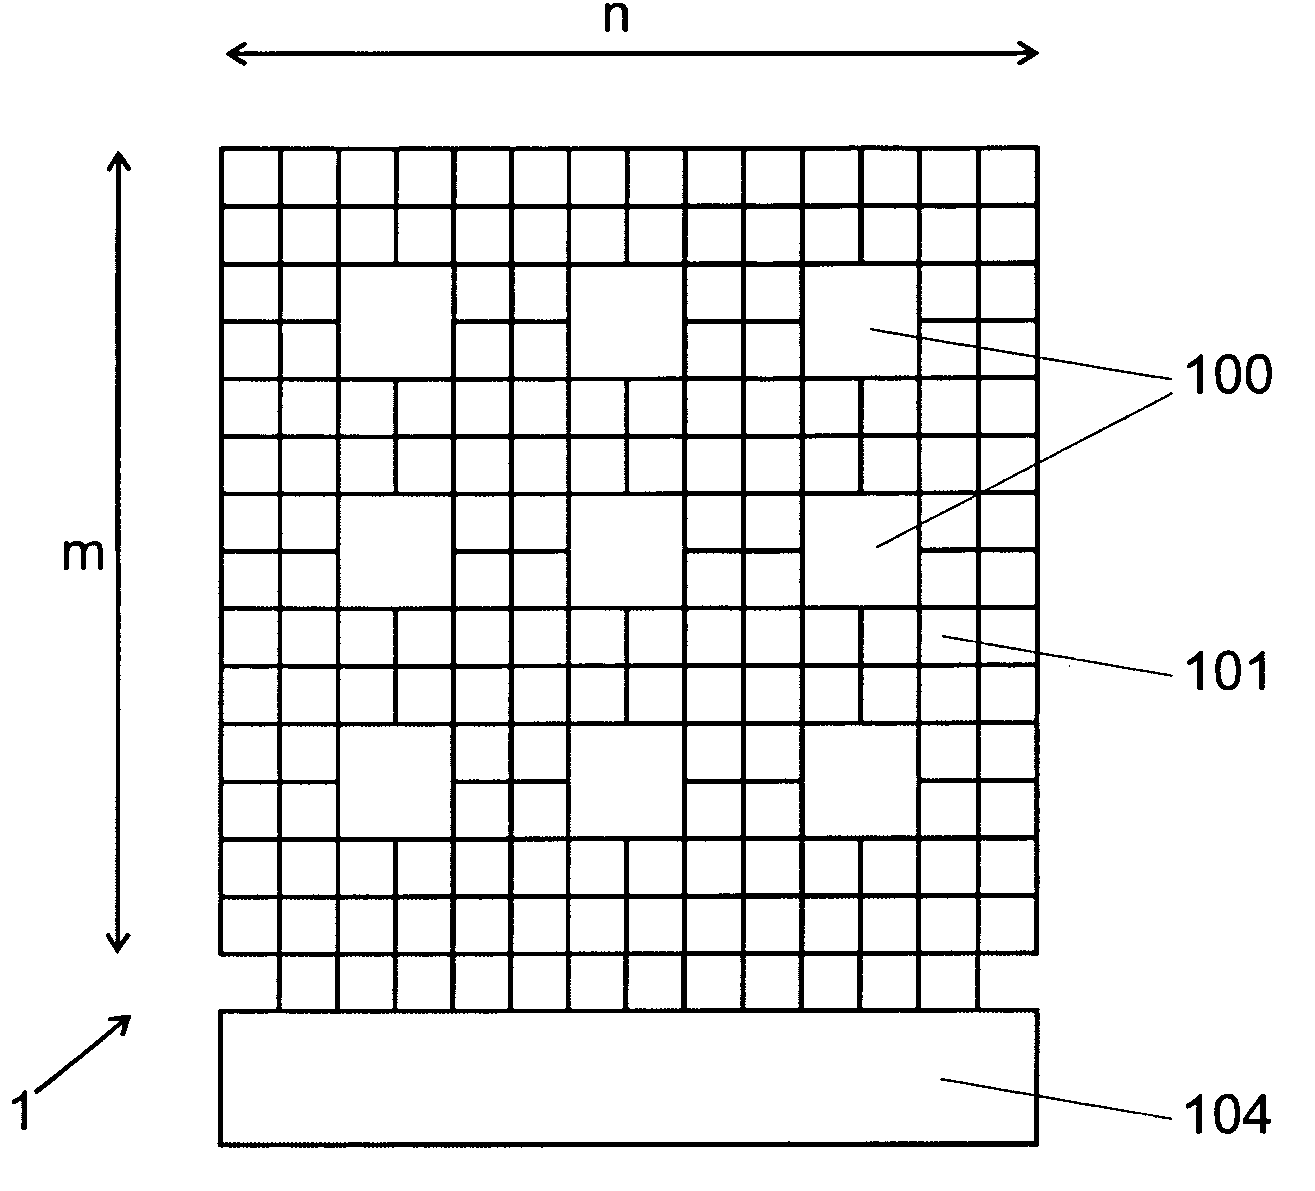 Integrated imager circuit comprising a monolithic array of single photon avalanche diodes